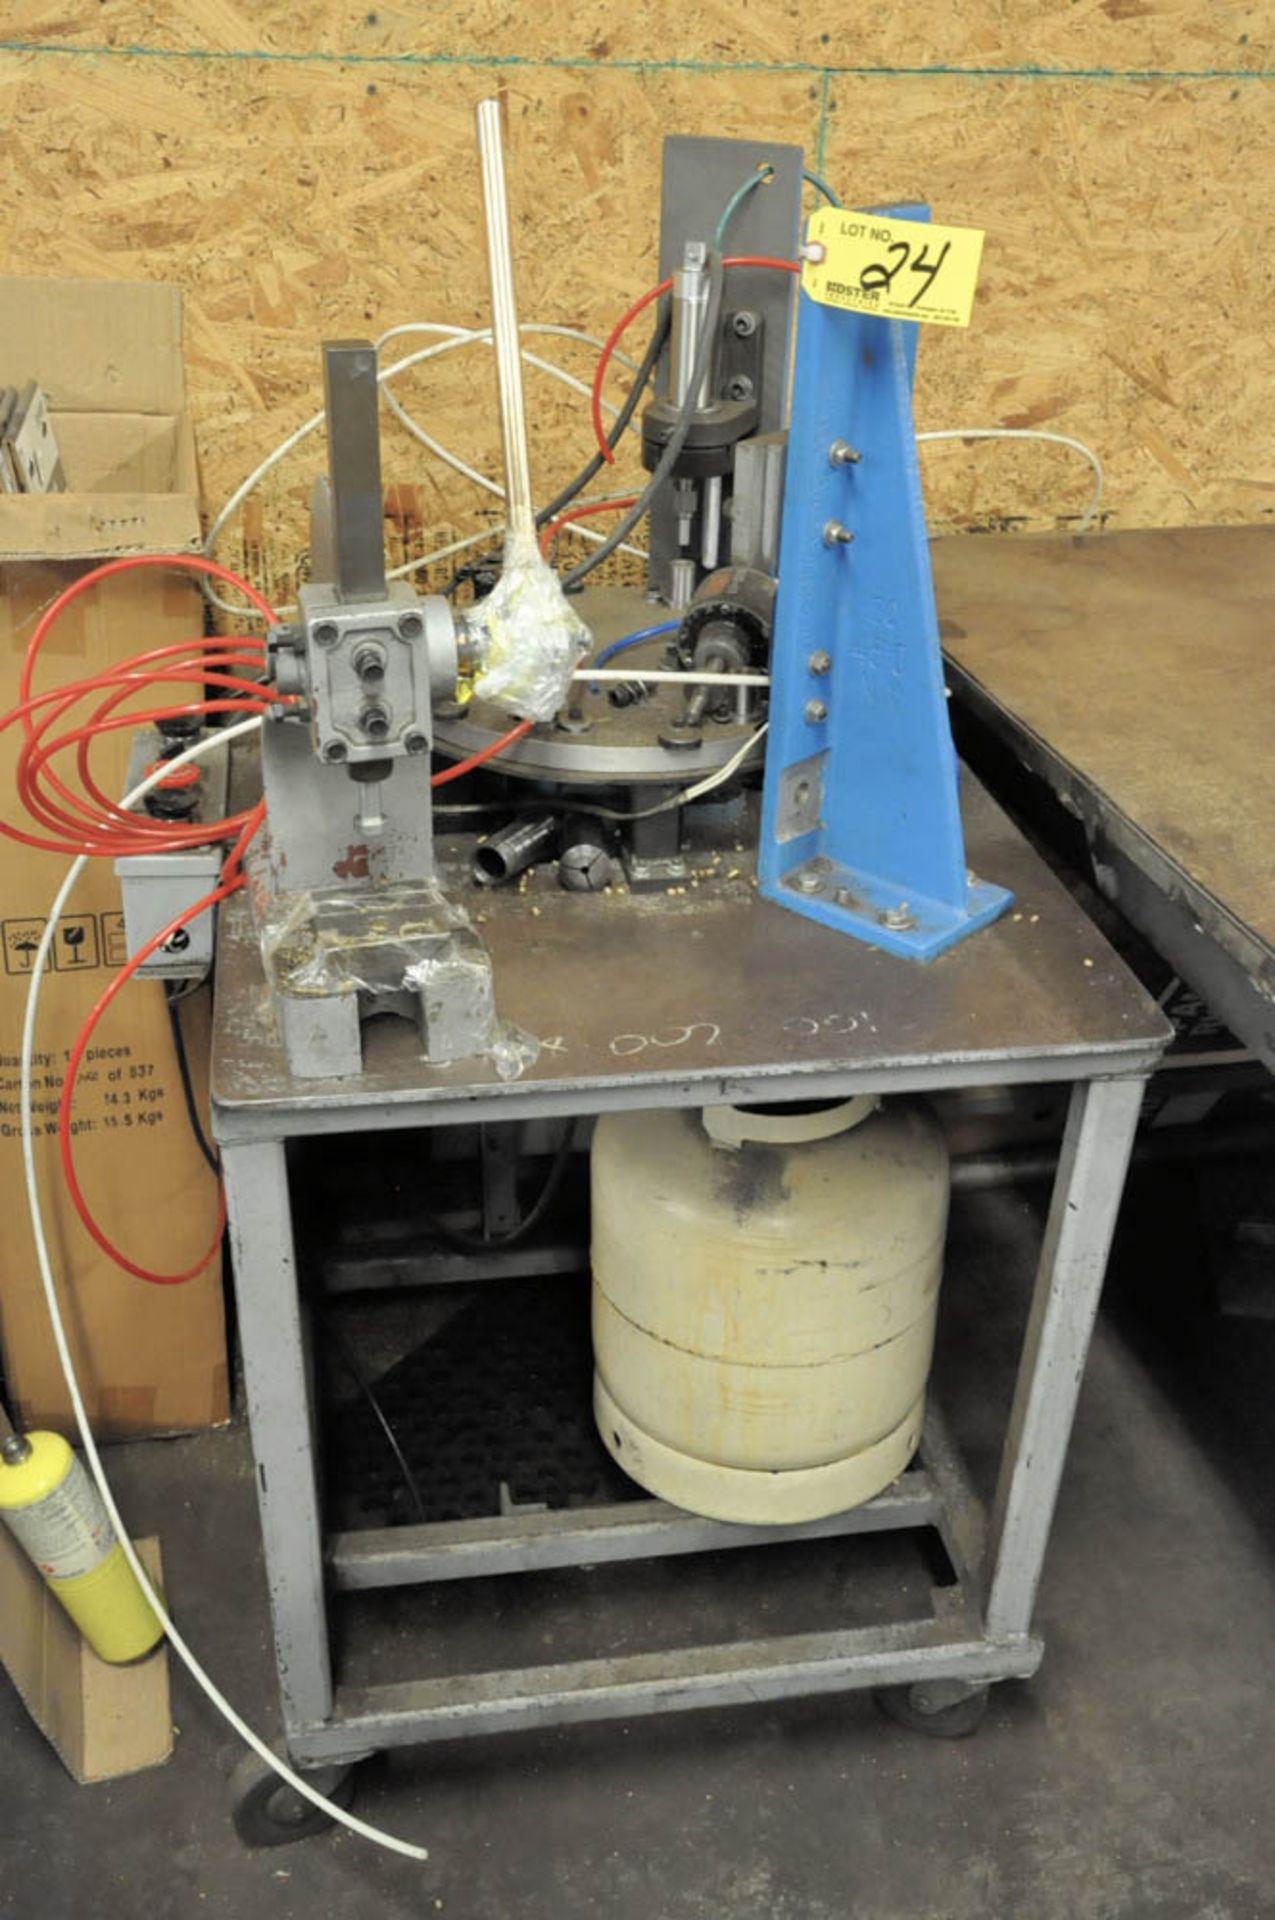 (1) BENCH TOP ARBOR PRESS, WITH 2-STATION PRESS OPERATION, 8" SINGLE END 3/4-HP GRINDER MOTOR